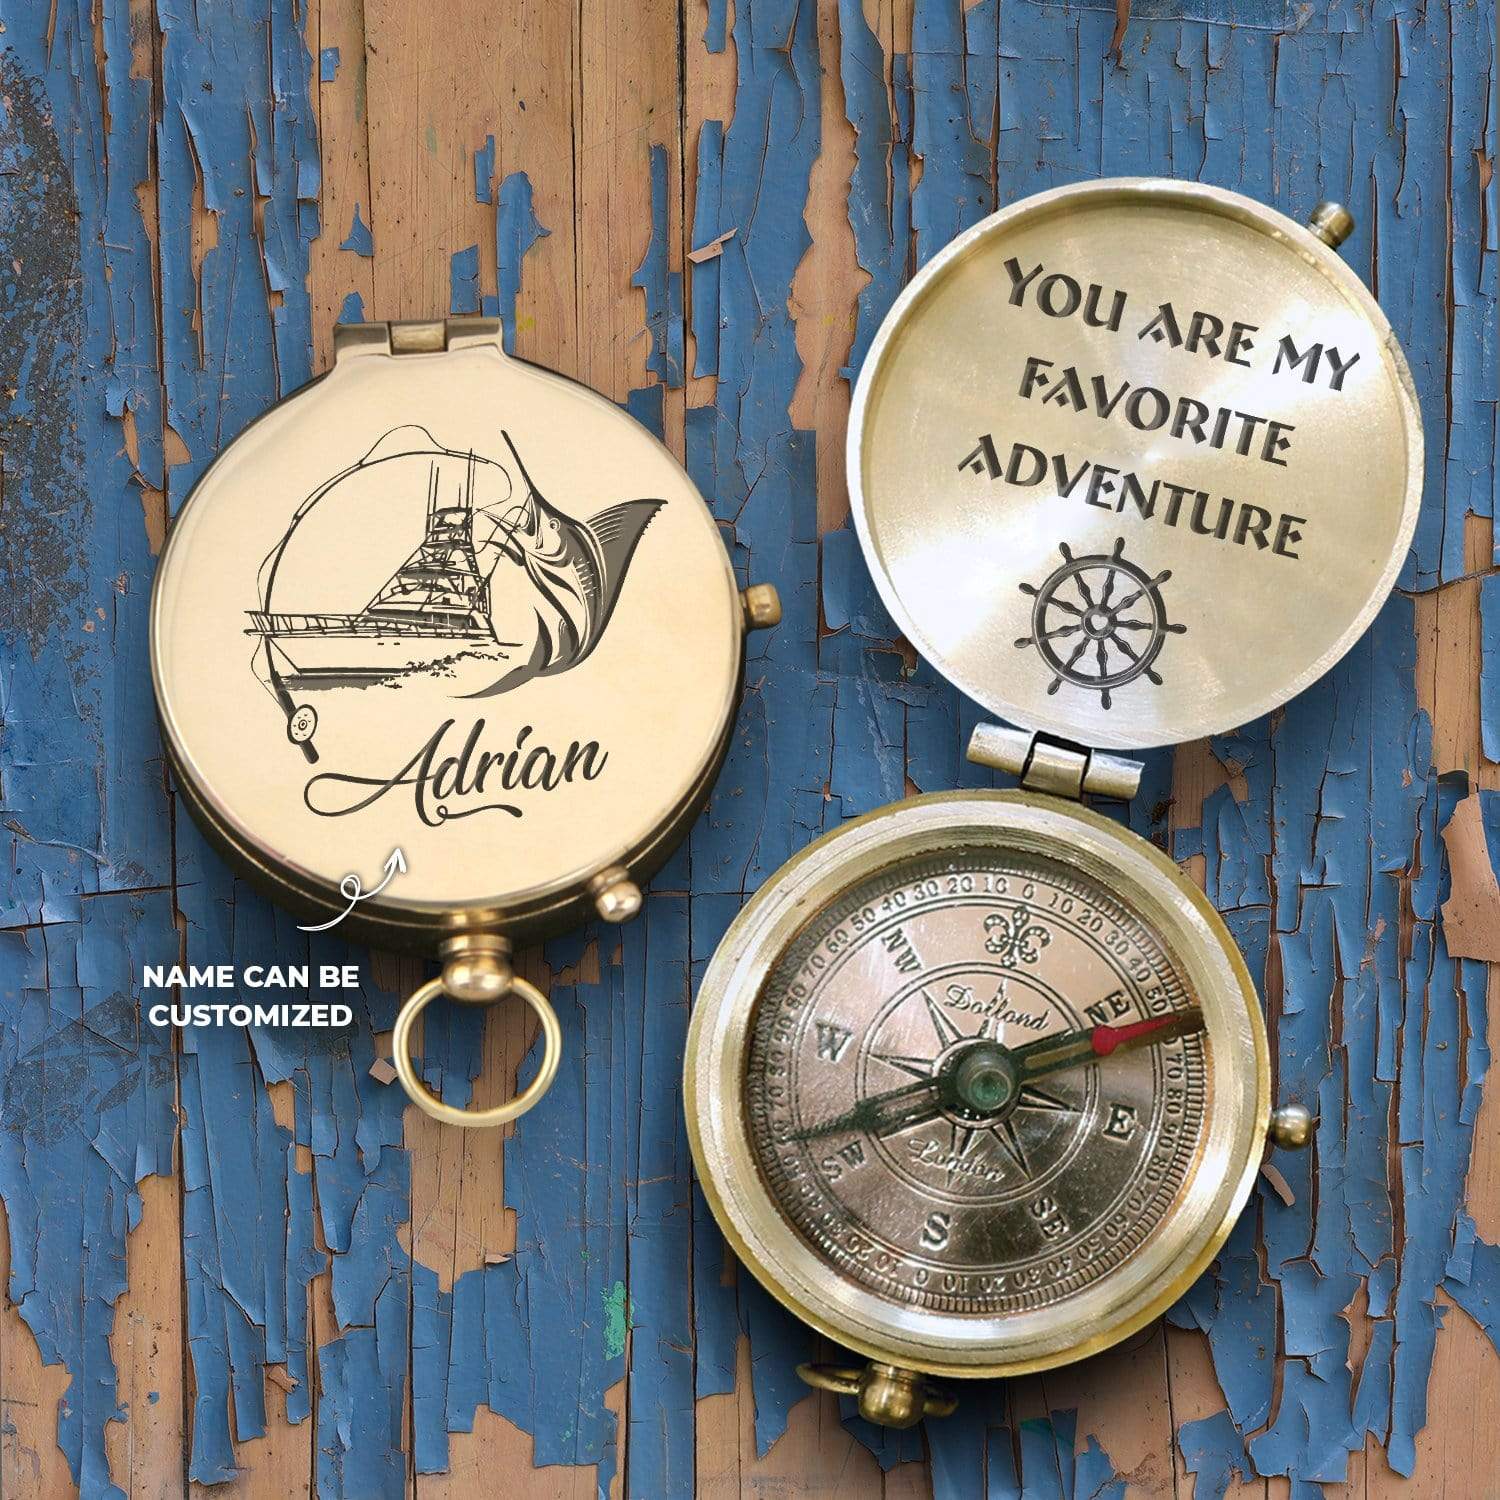 Personalized Engraved Compass - Fishing - You Are My Favorite